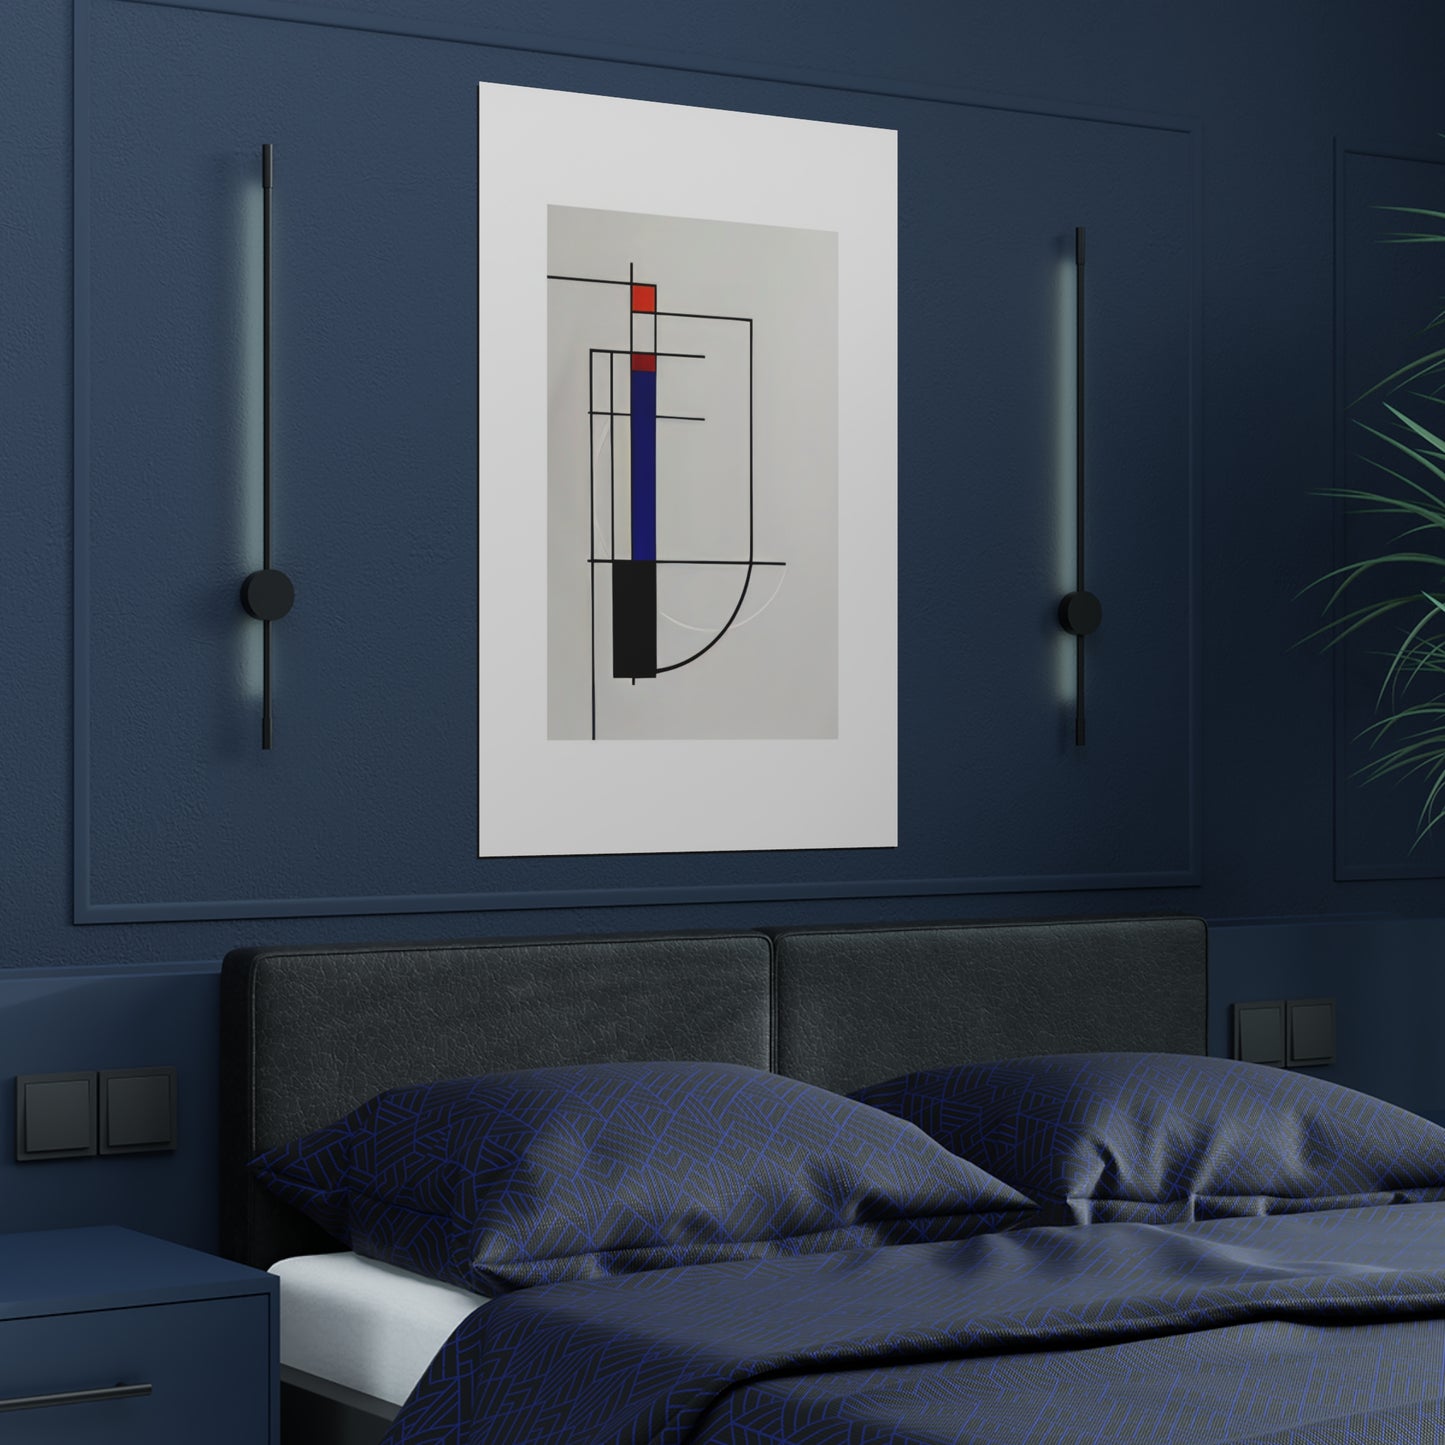 Essence of Form (3/3) Midnight Minimalism - Satin Poster draws from Bauhaus photography, infused with abstract constructivism. The rich palette of red, black, ochre, and blue contrasts with kinetic sculptures and symbolic still-lifes, creating a dynamic interplay of shadow and light. With echoes of the historic "Werkstätte" era, this poster introduces depth, making it perfect for introspective and artistic spaces.